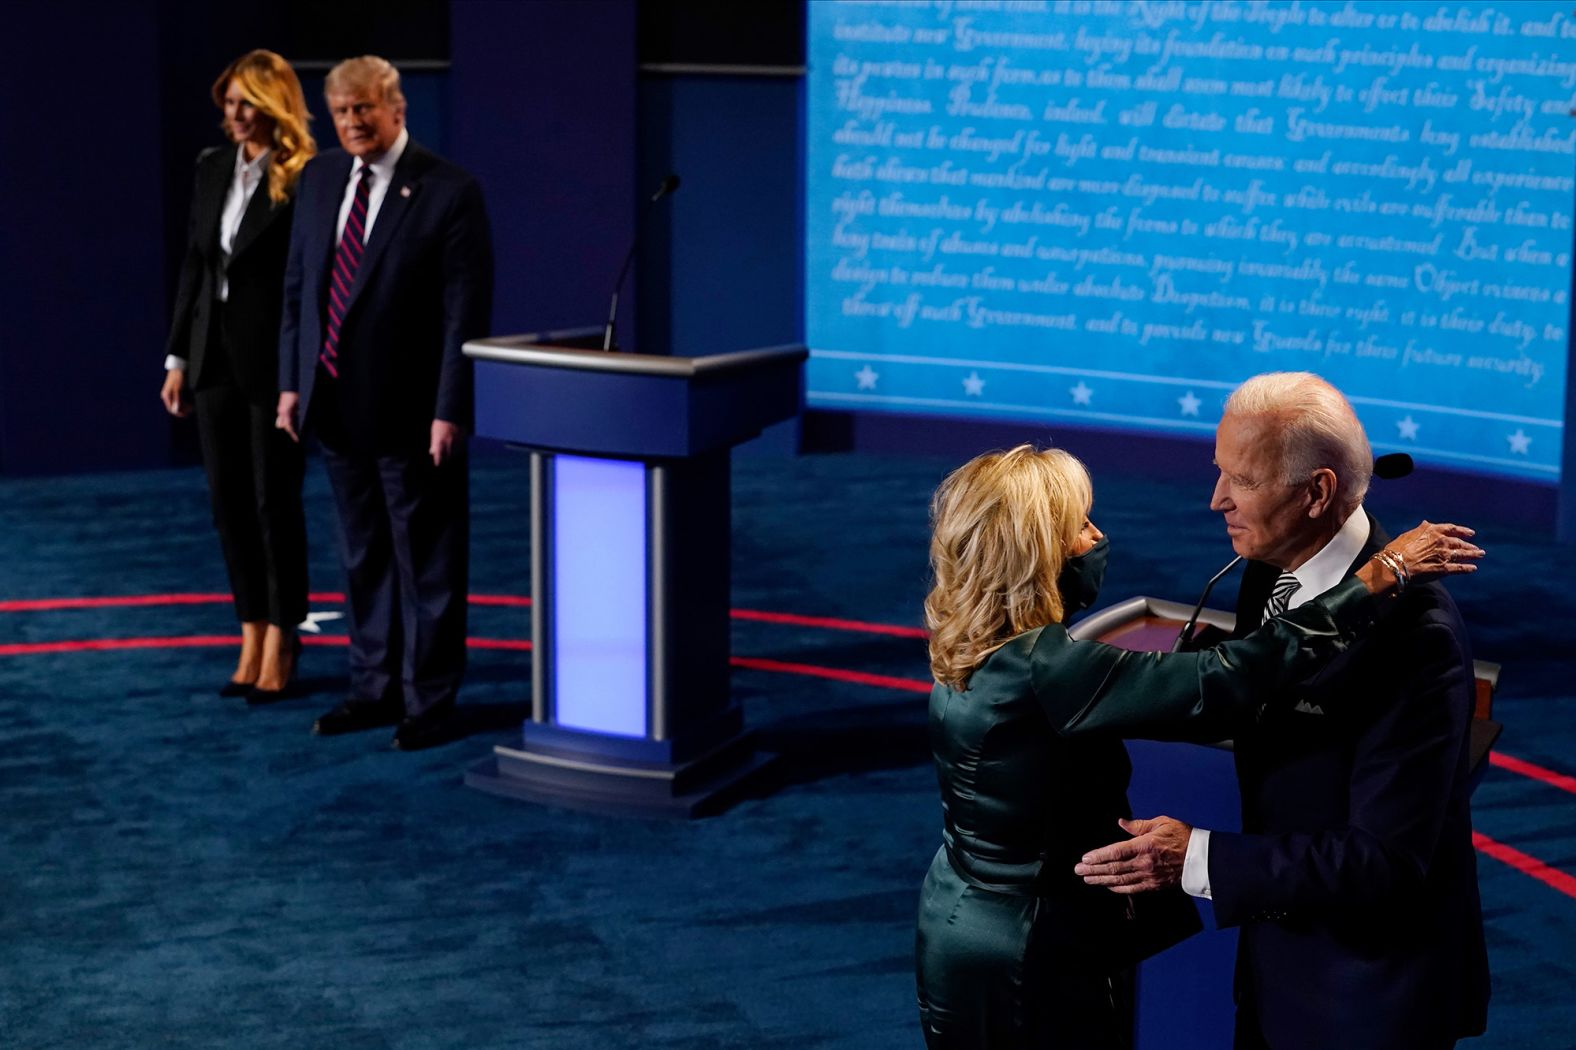 Biden is hugged by his wife, Jill, at the end of the debate while Trump is joined by his wife, Melania.